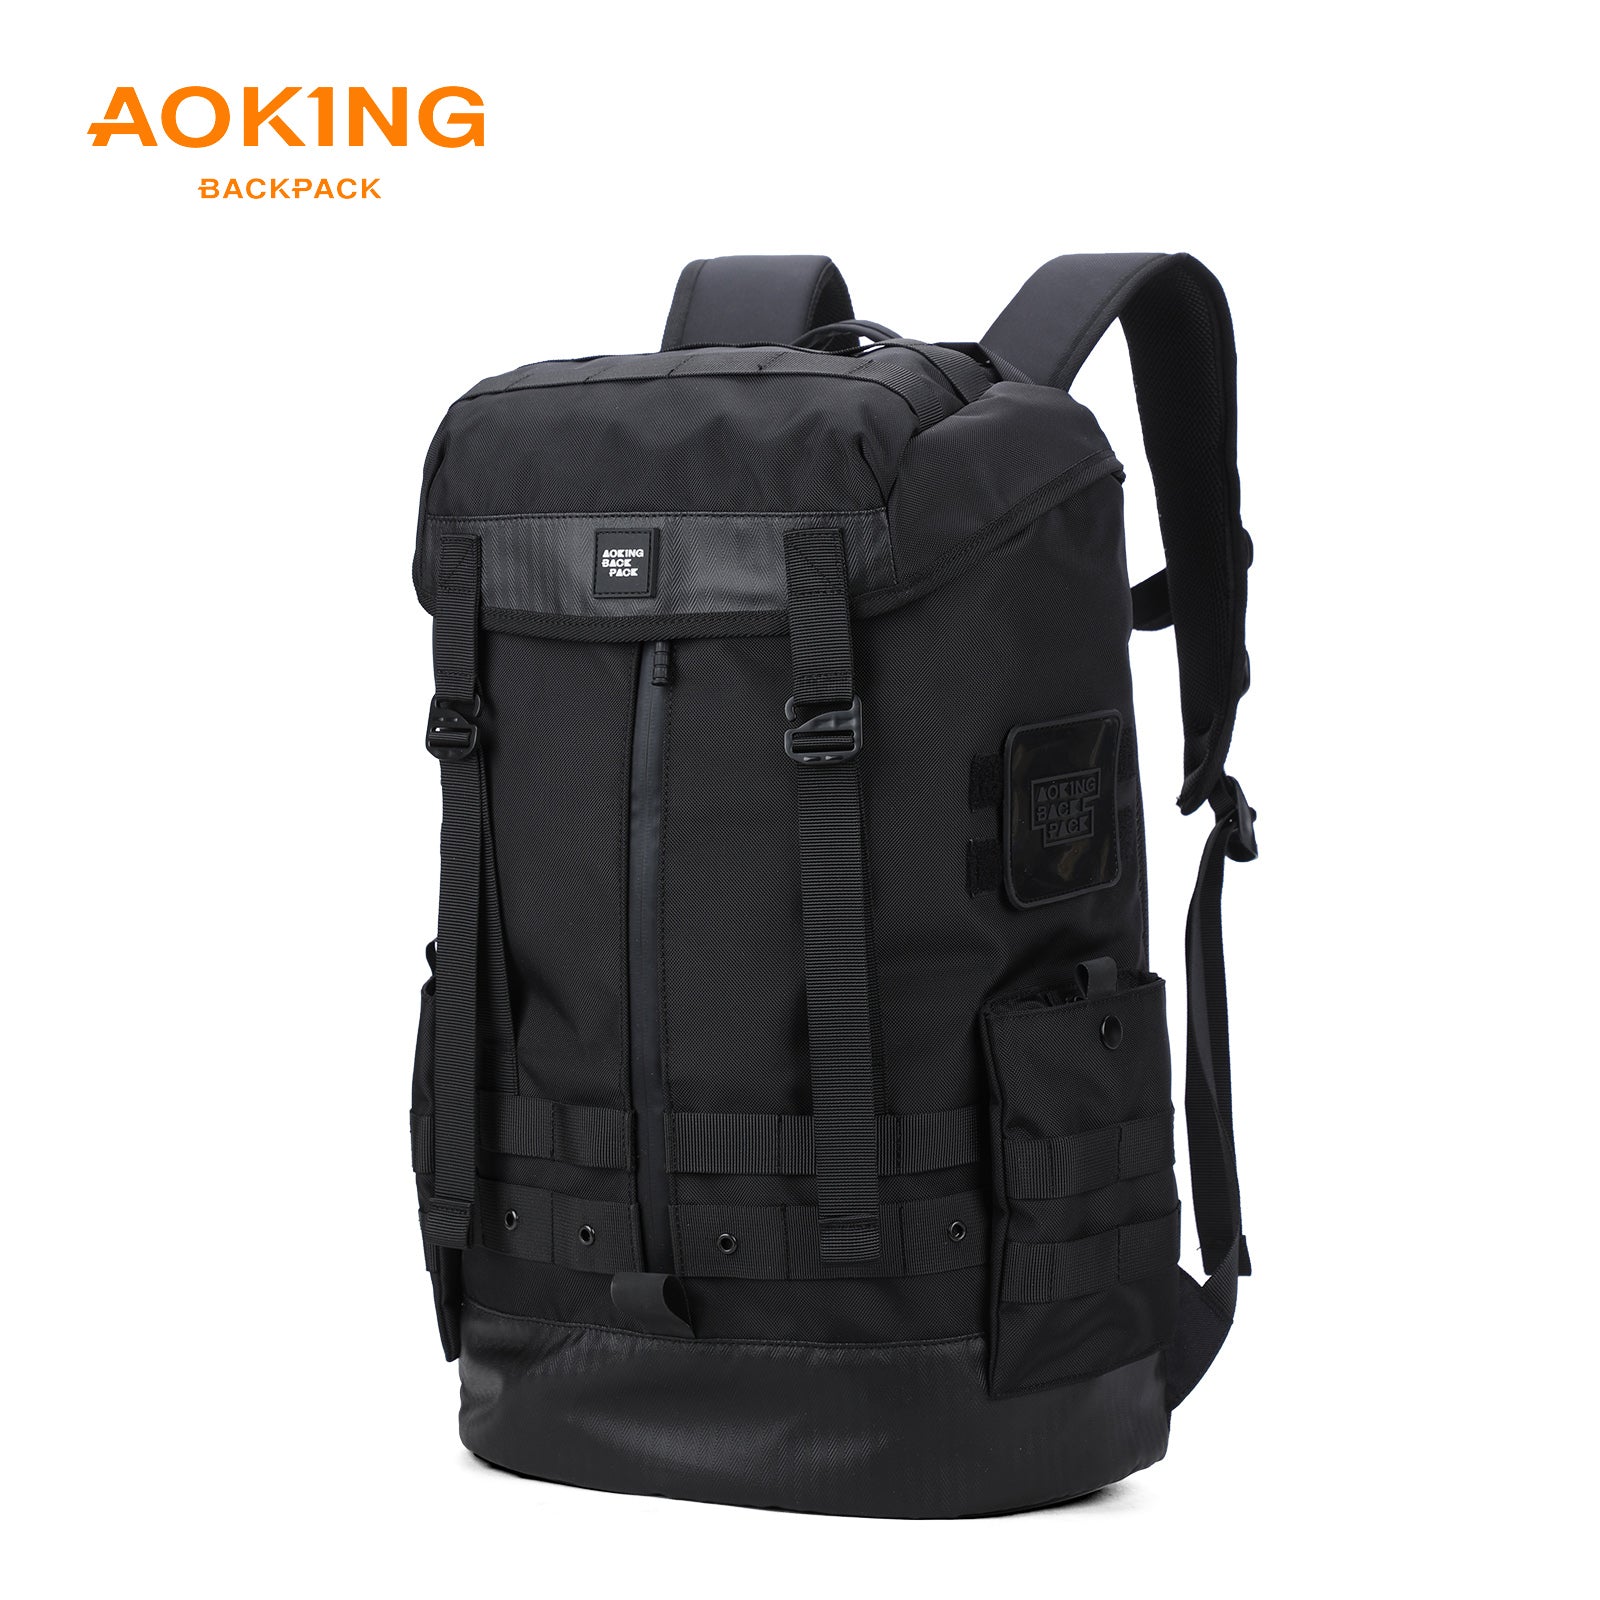 Aoking Large Capacity Fashion Casual Backpack XN3352